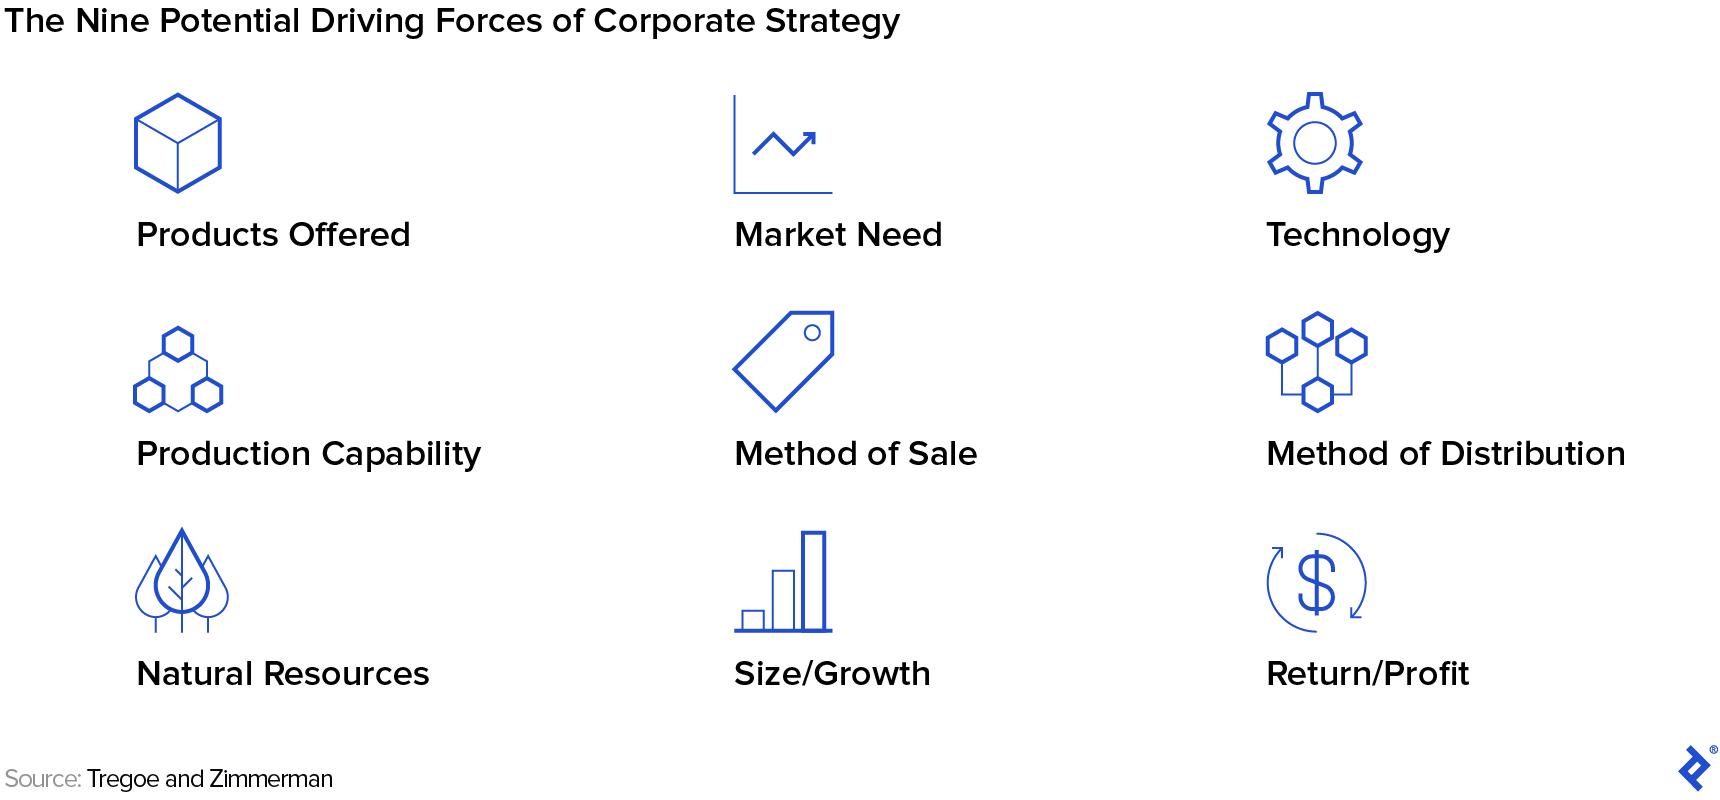 An image showing nine icons labeled with Tregoe and Zimmerman’s 9 driving forces of corporate strategy: products, market, technology, production capability, method of  sale, method of distribution, natural resources, size/growth, return/profit.